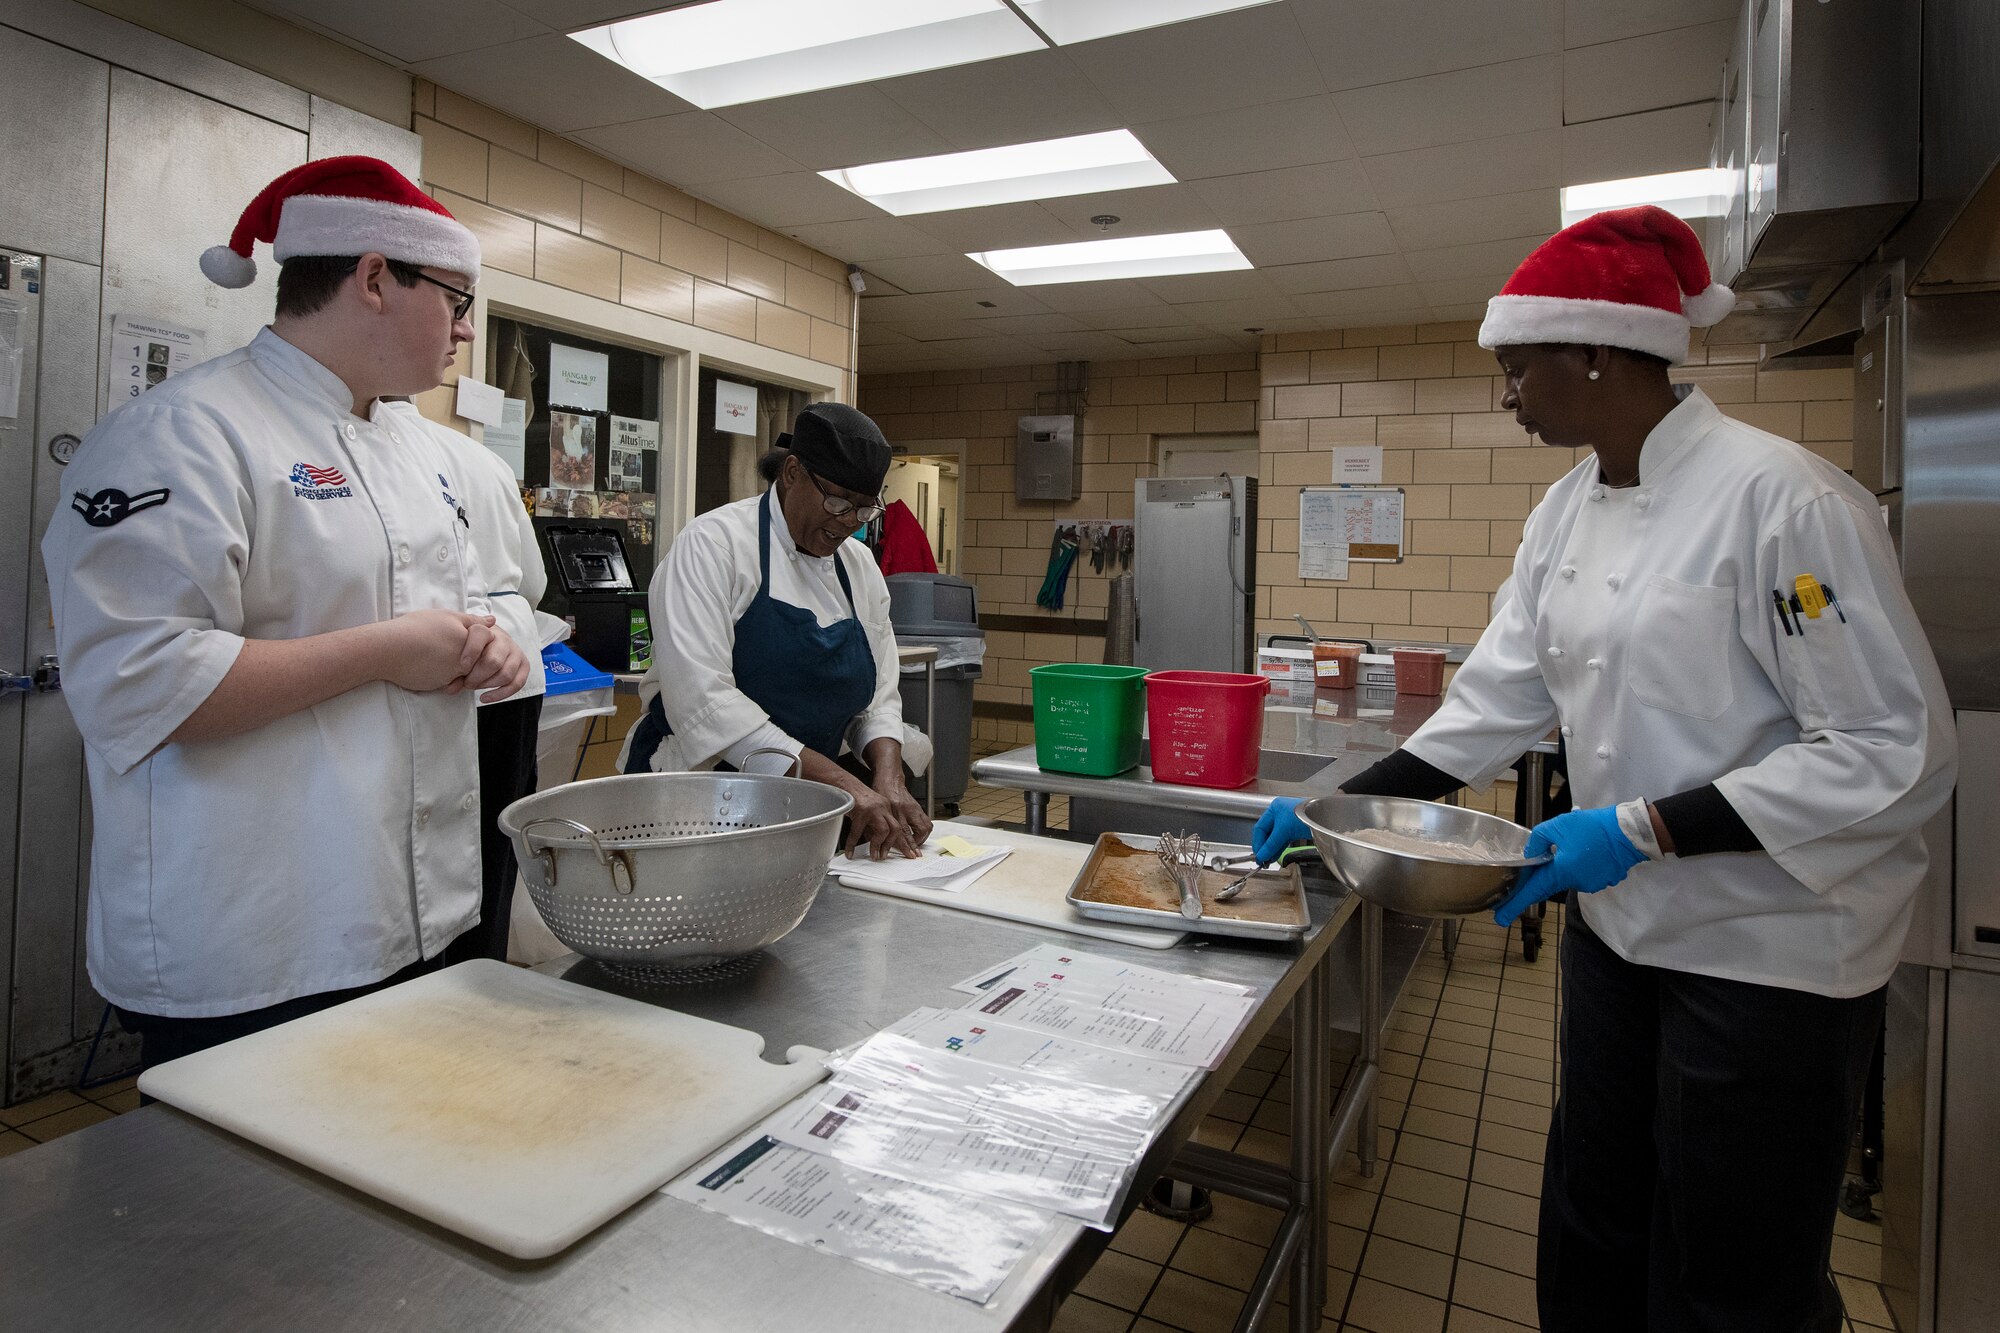 Airman Bryce Doherty, a food services specialist assigned to the 97th Force Support Squadron, with Starr Fanner and Paula Seamster, cooks from the Hangar. 97 Dining Facility, prepare food Dec. 19, 2018 at Altus Air Force Base, Okla